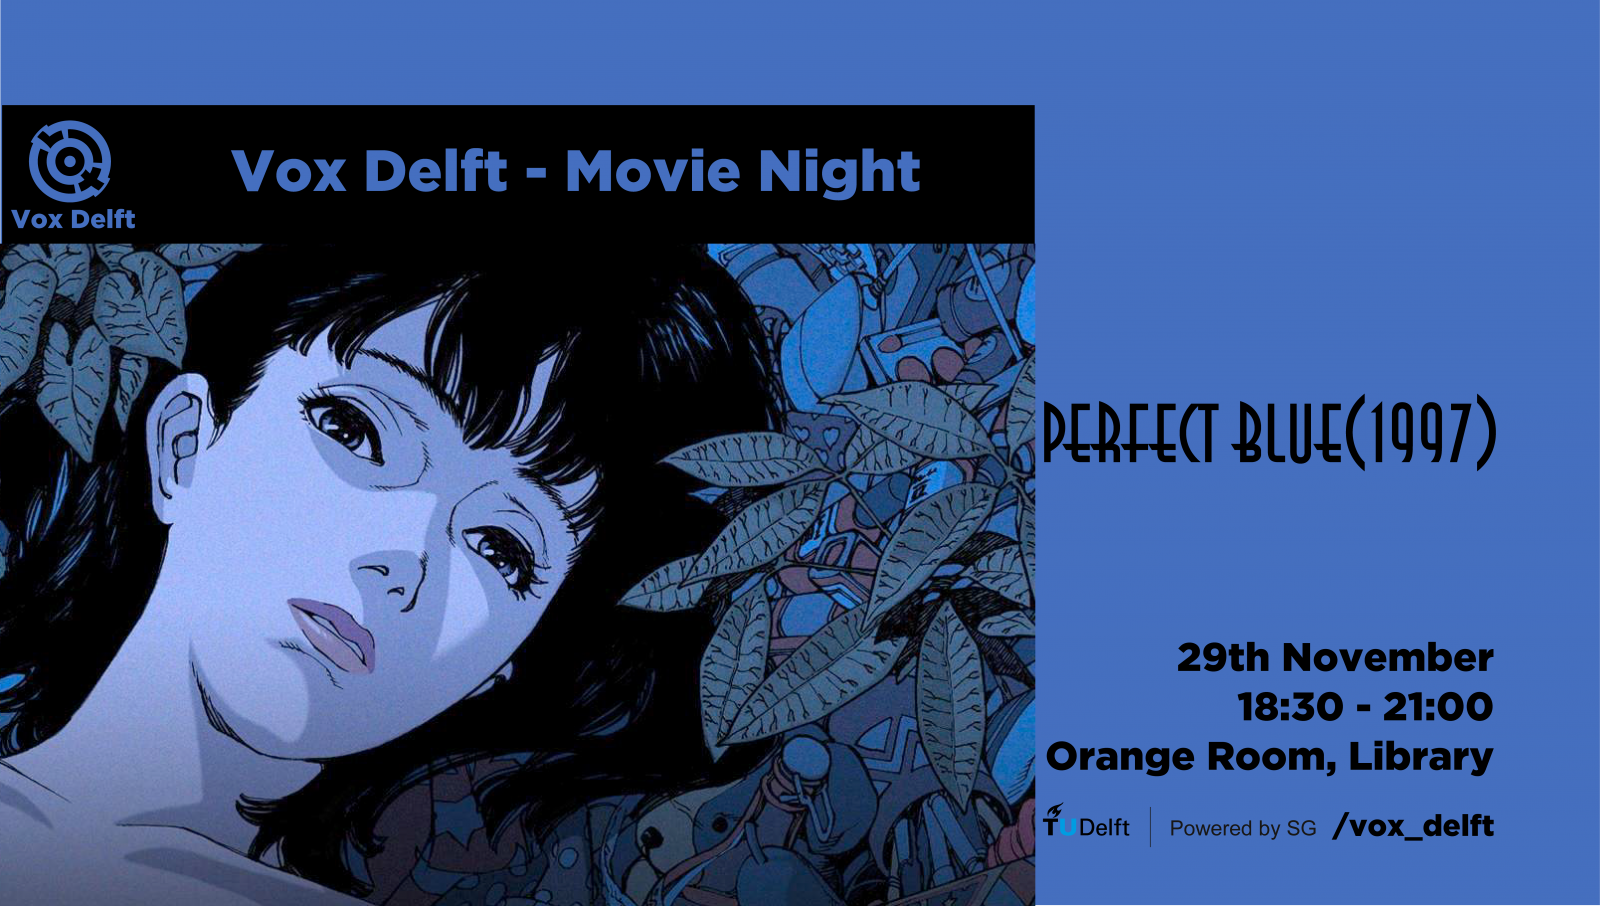 Perfect Blue Poster 